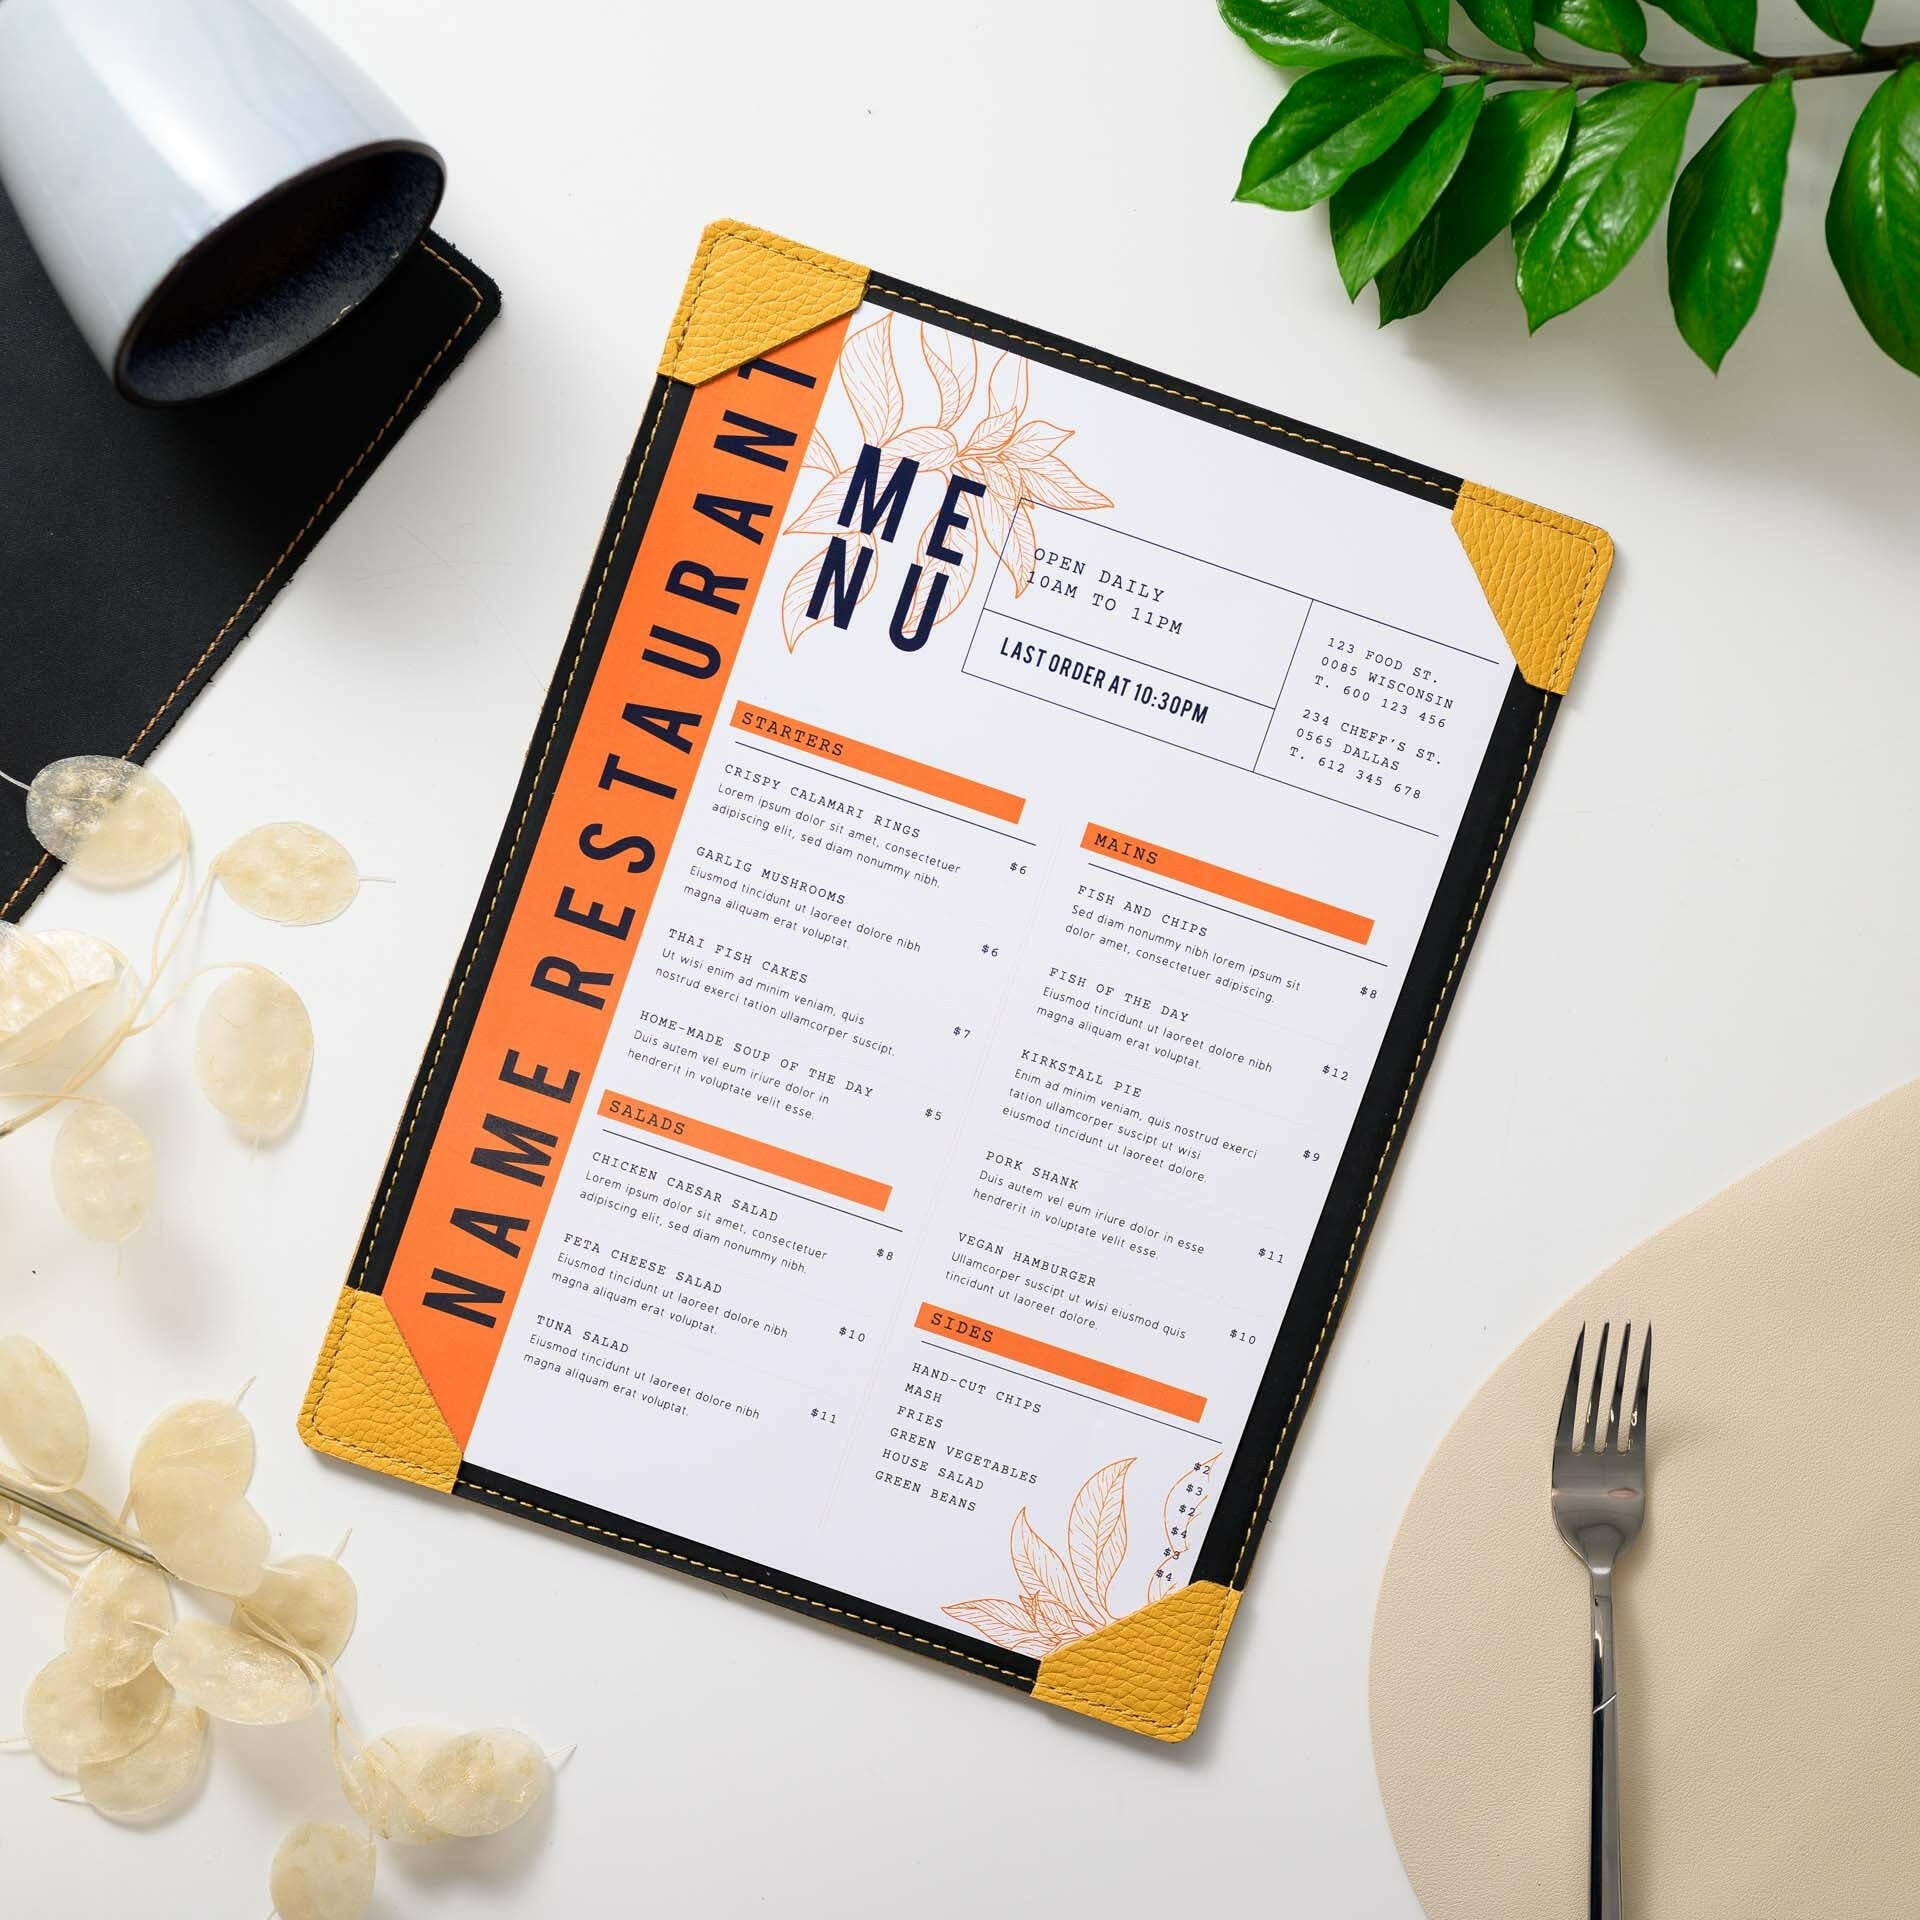 Our leather menu clipboard features chic corner fixings and a black-colored back for a sophisticated touch.